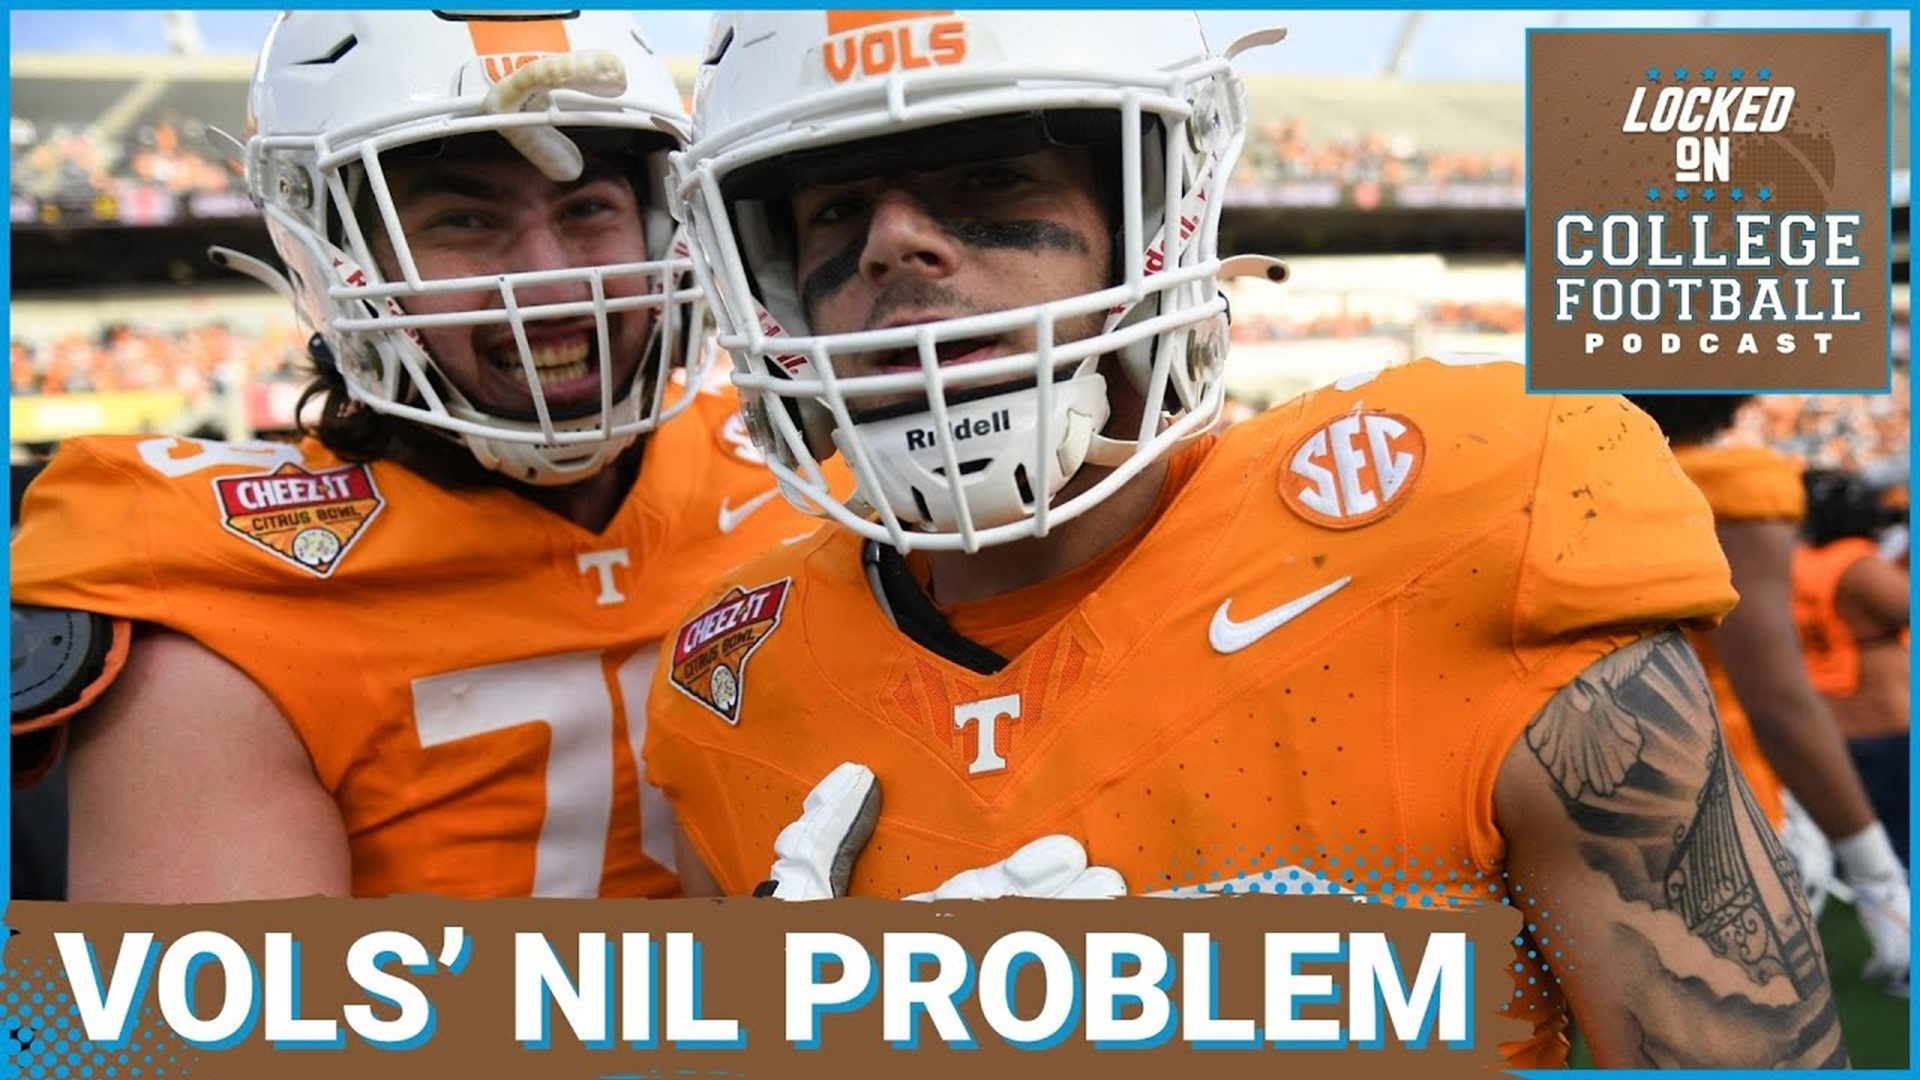 Tennessee is under investigaion for potential NIL violations in recruiting under guidelines the NCAA claim were not adhered to.